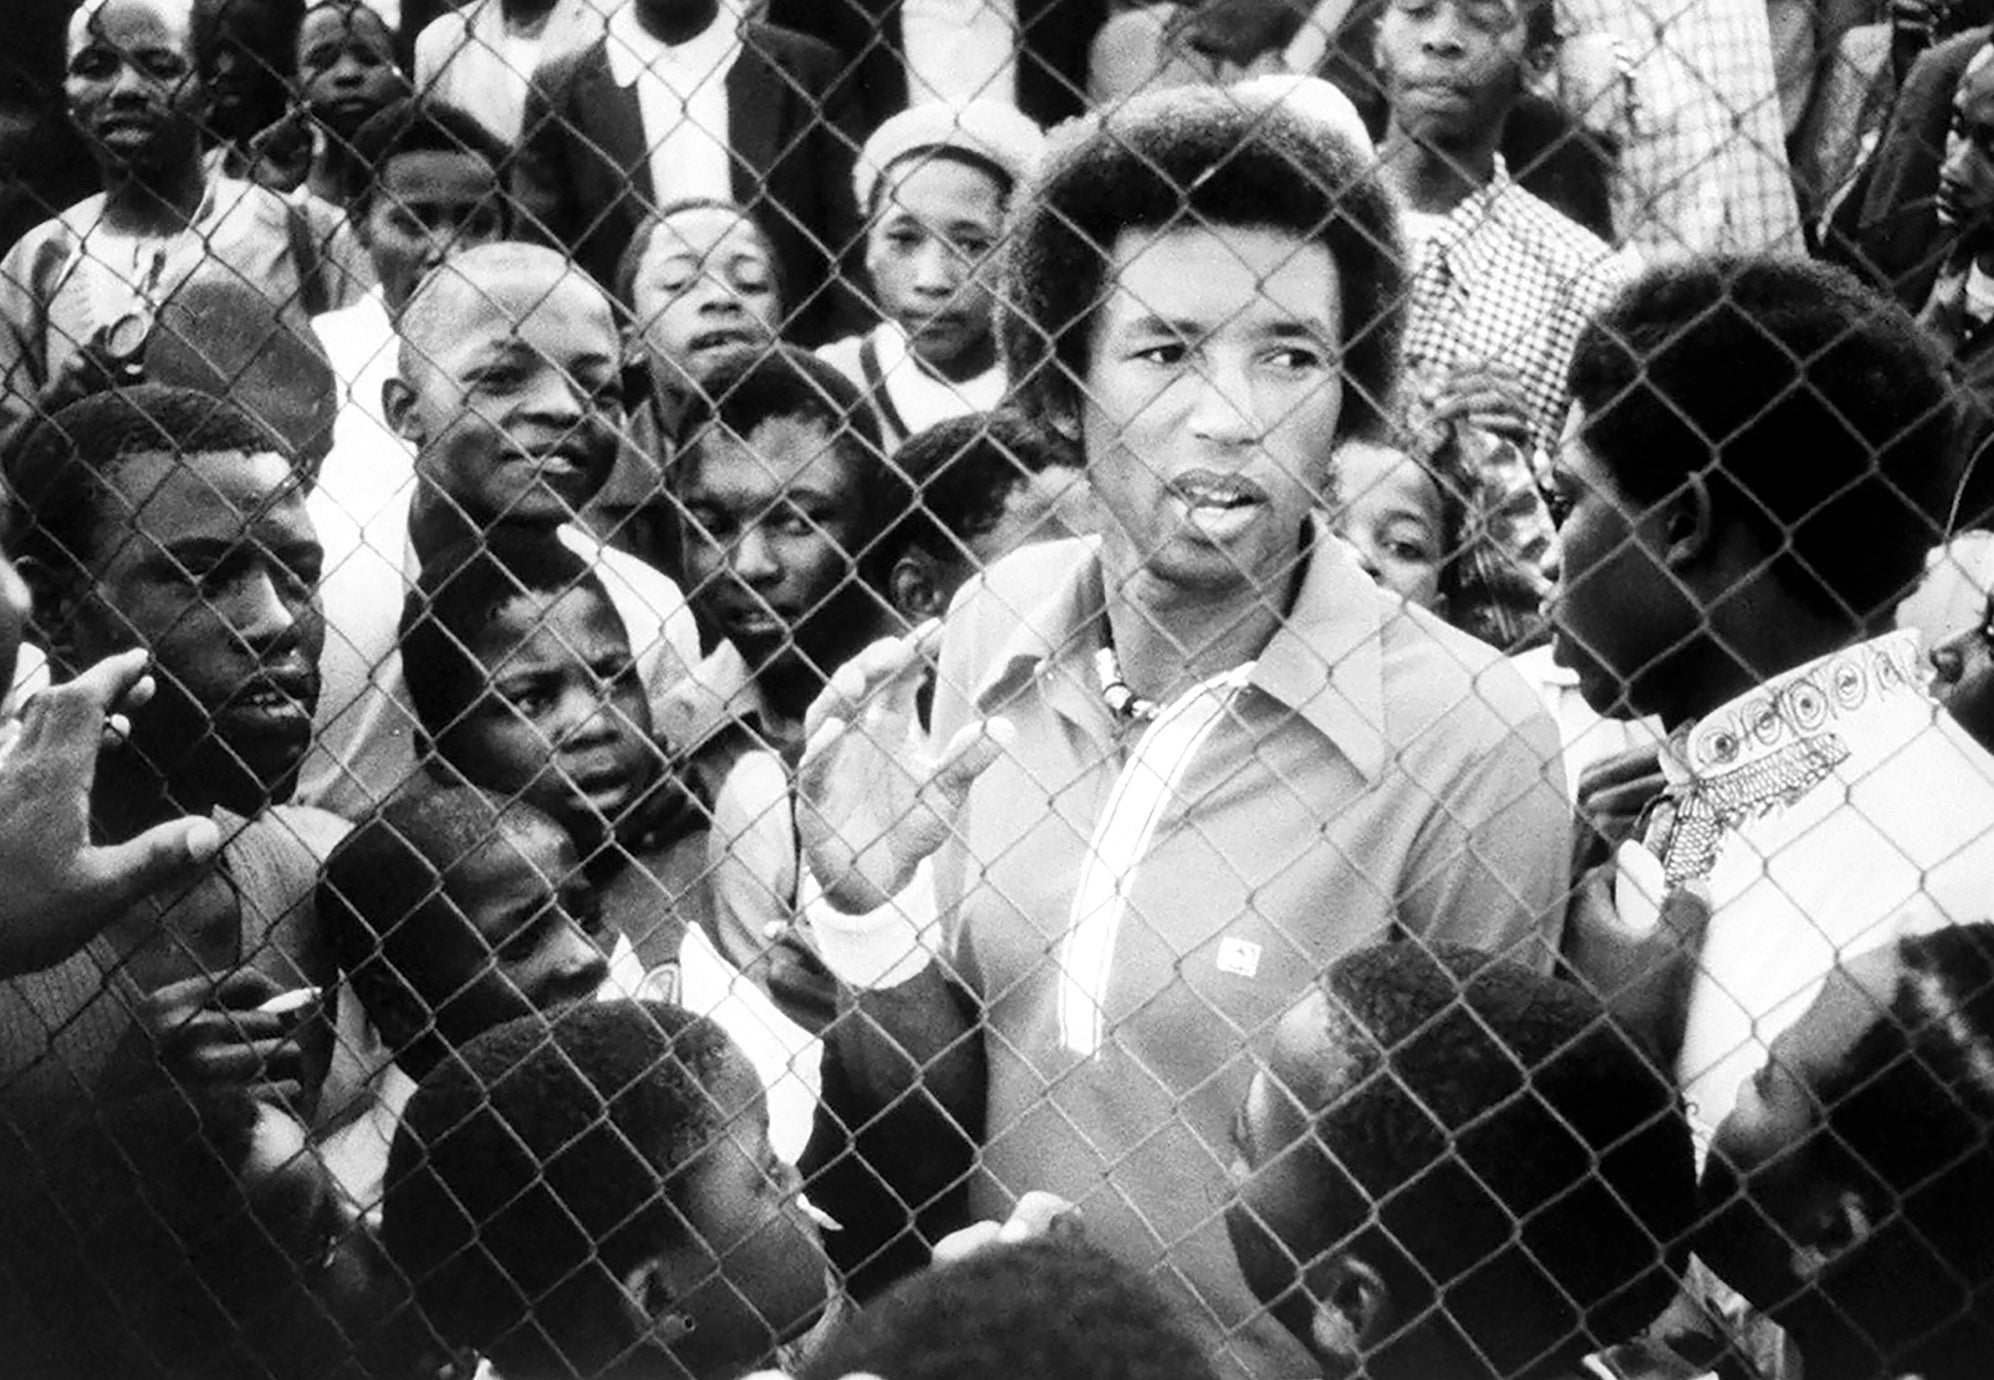 50 Years Ago Today: Arthur Ashe Visits South Africa